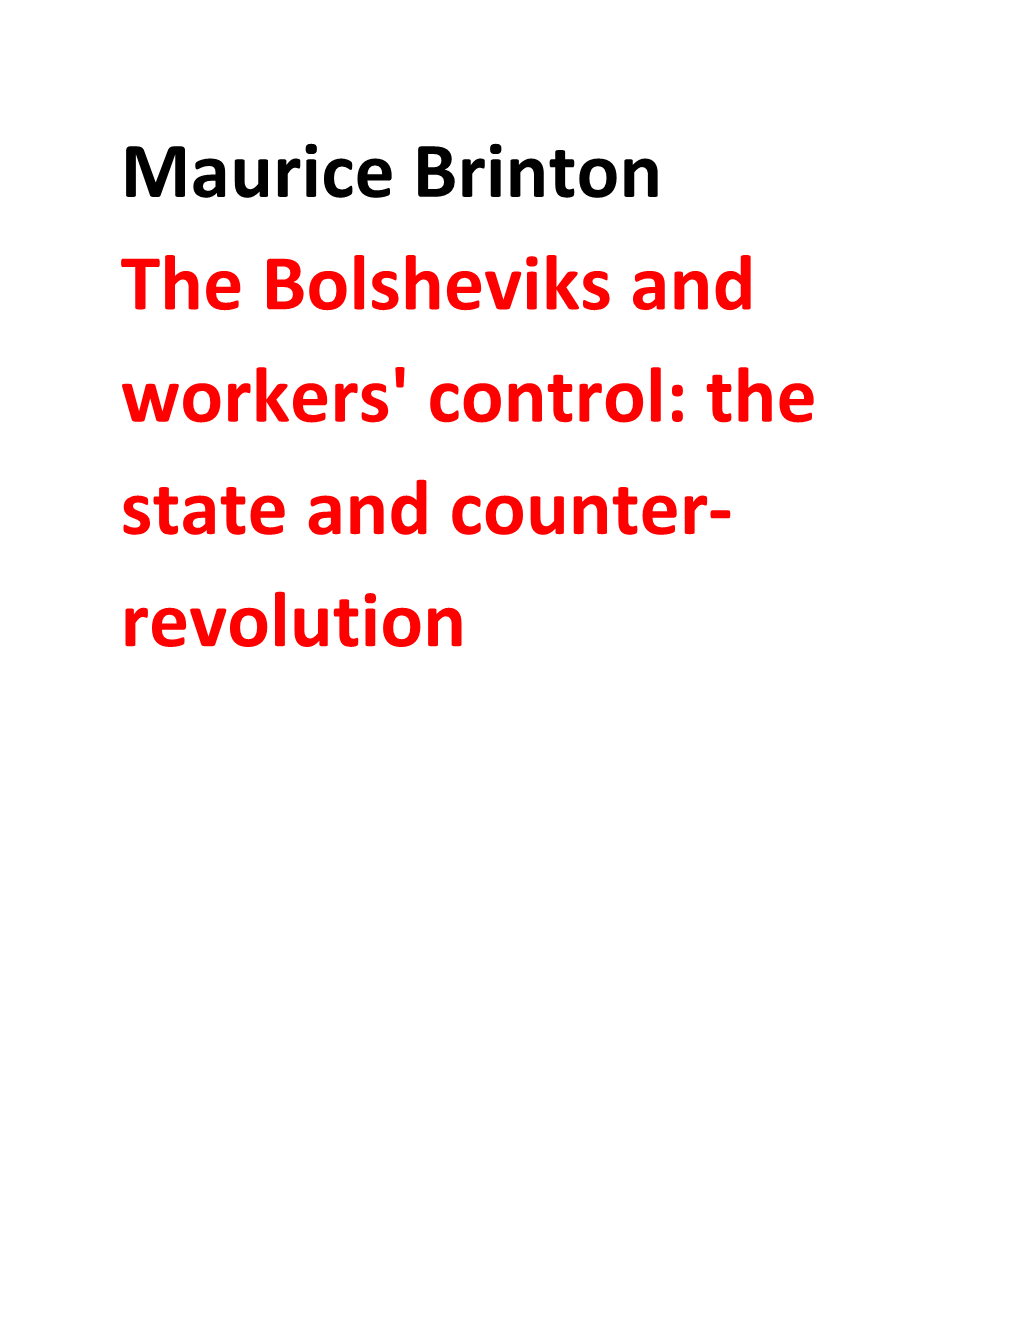 Maurice Brinton the Bolsheviks and Workers' Control: the State and Counter- Revolution